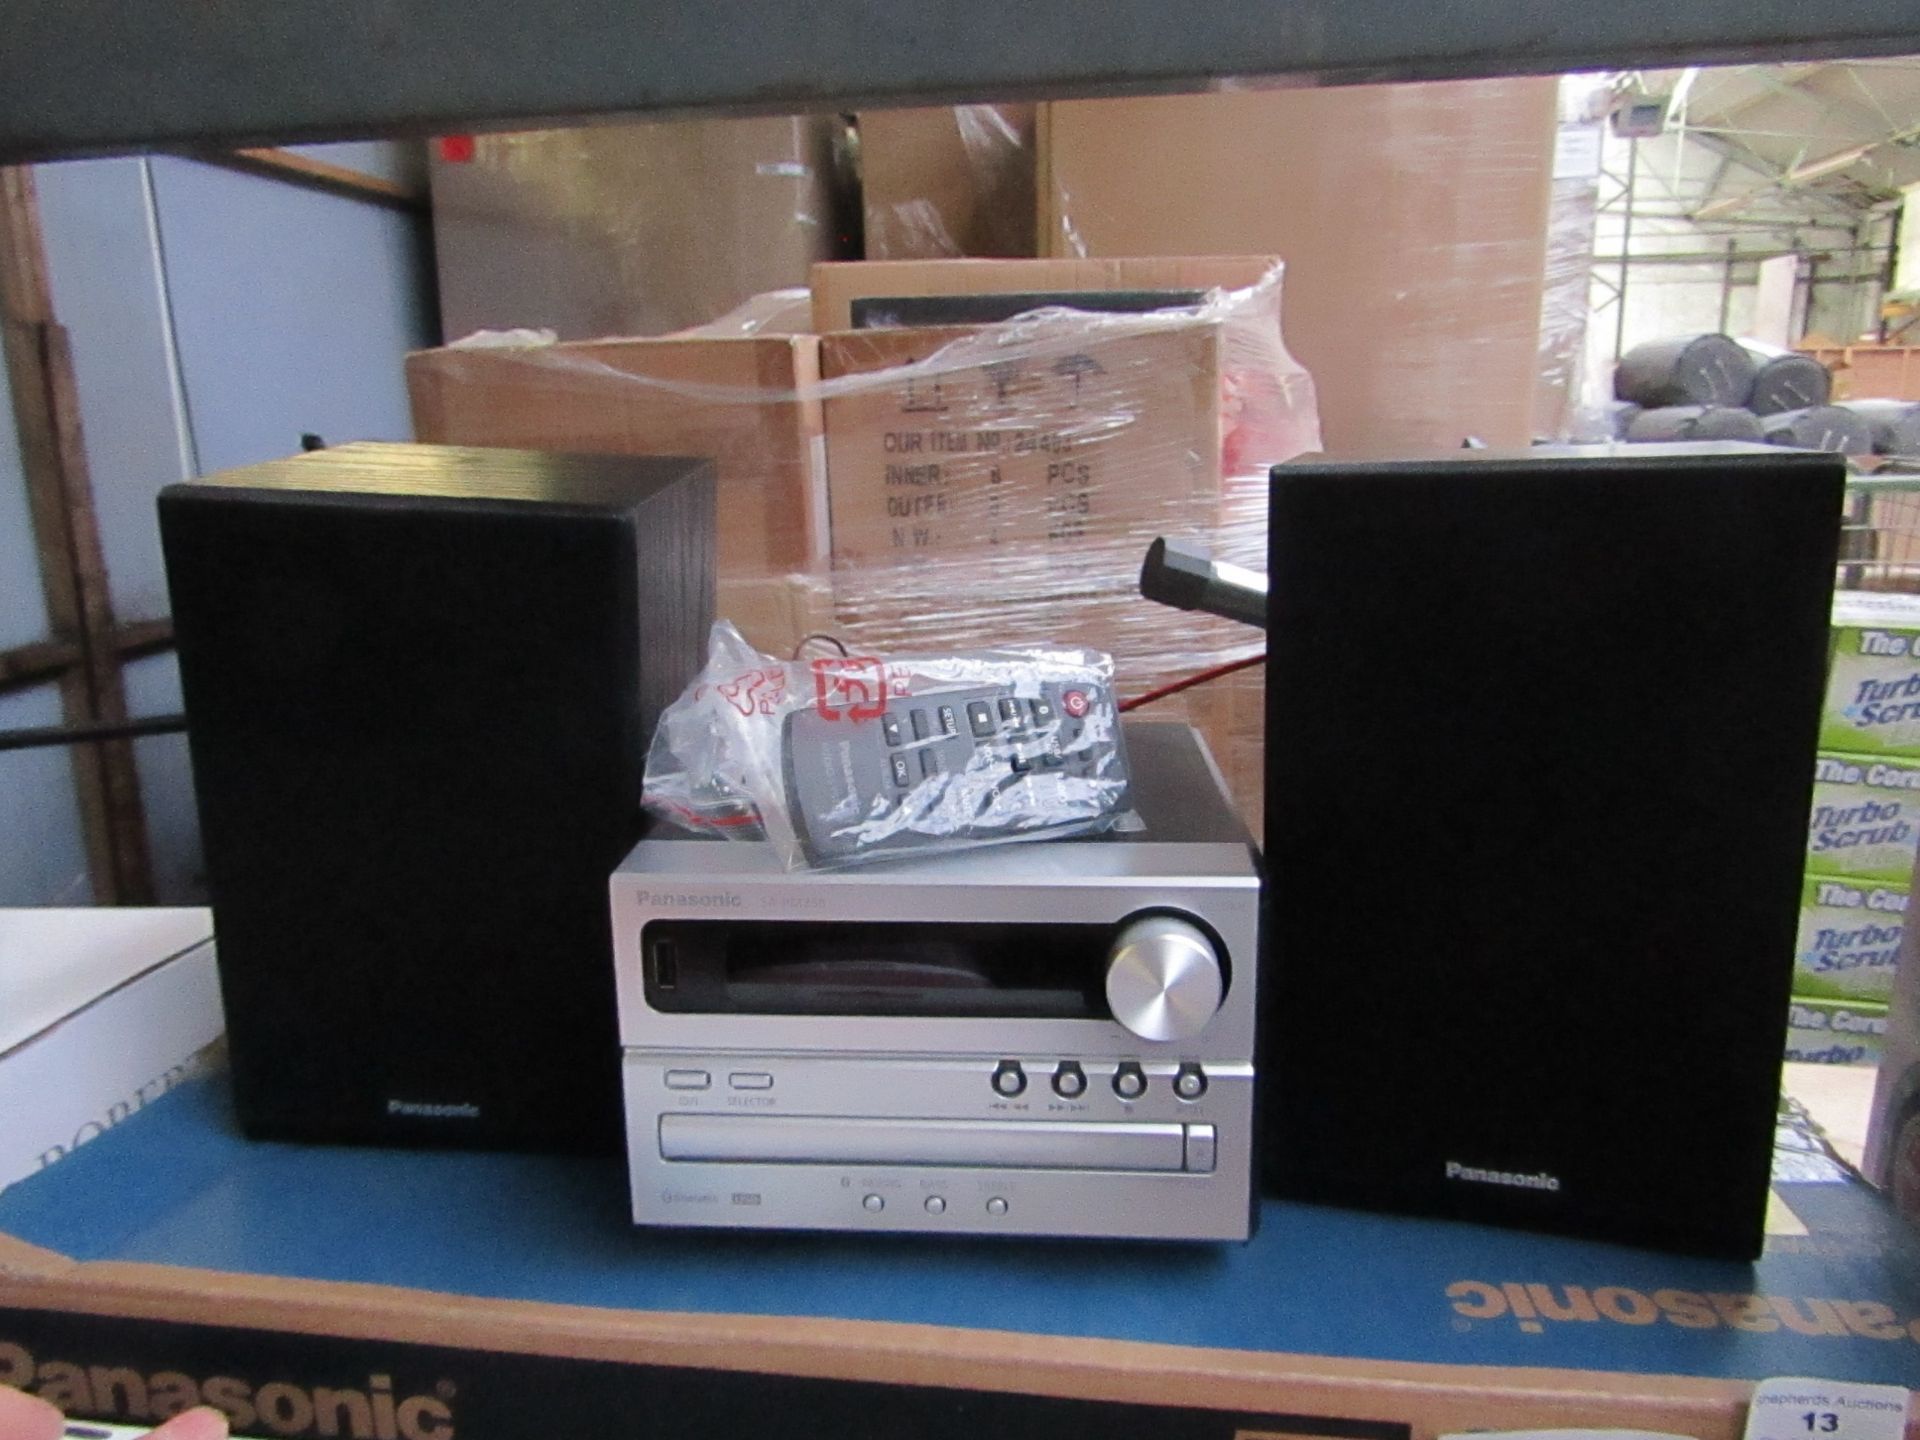 Parasonic SC-PM250 CD Stereo System Bluetooth tested working & Boxed